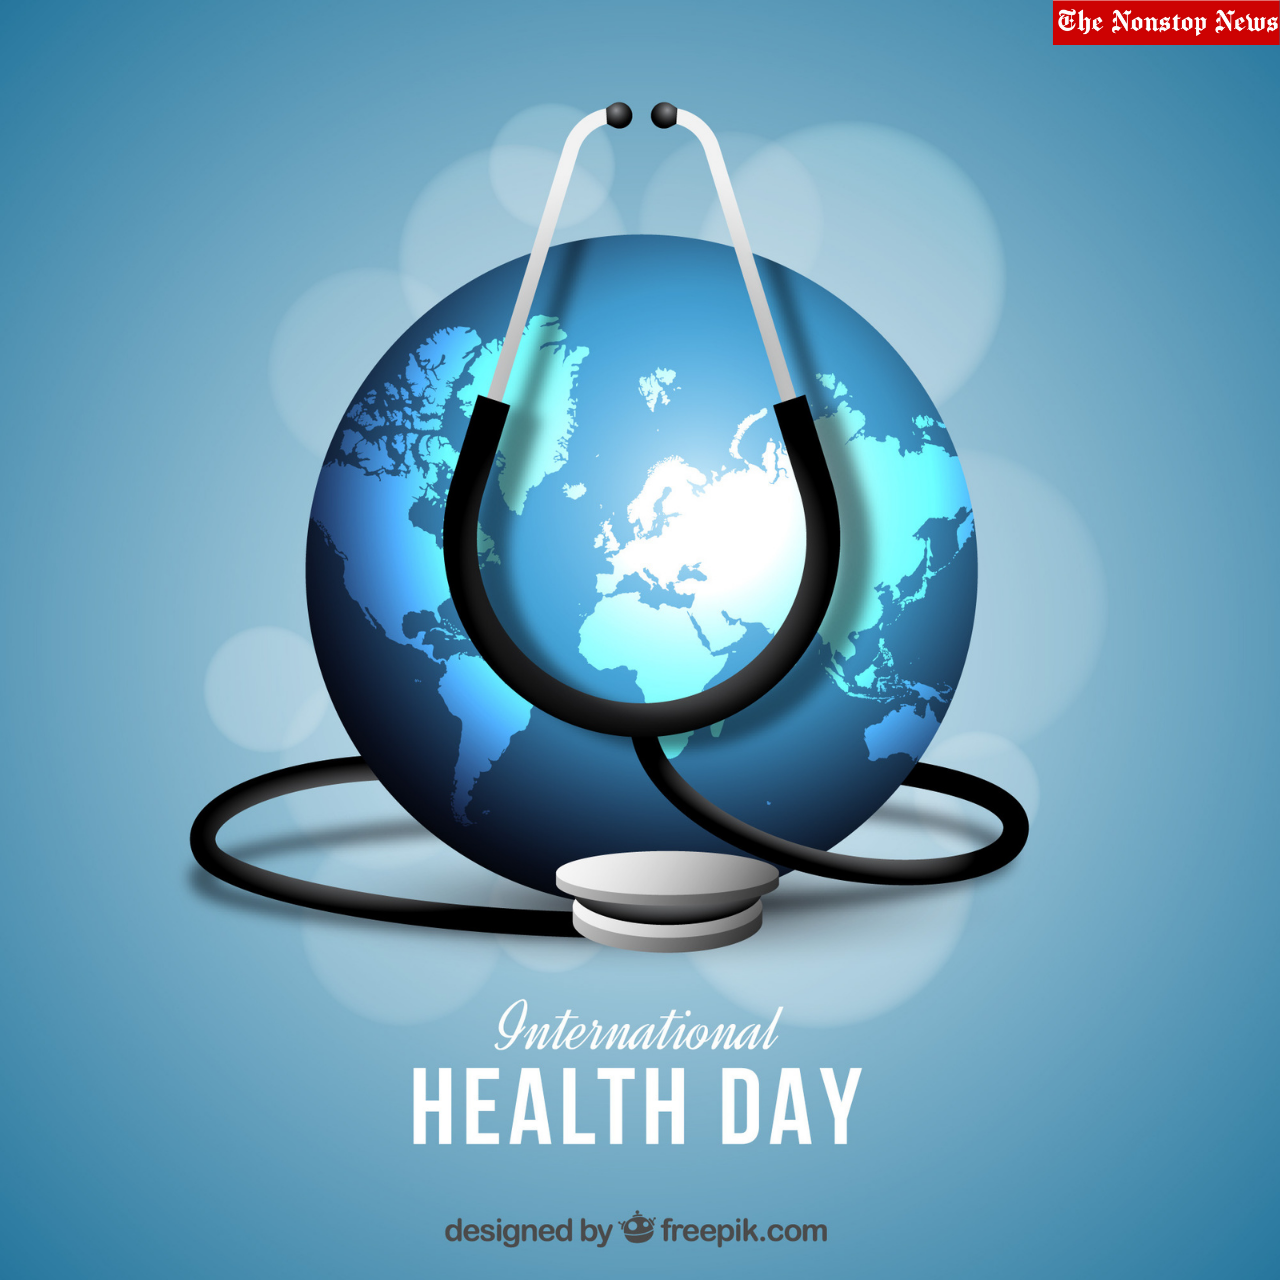 World Health Day 2022: Top Inspiring Quotes, Slogans, Wishes, Instagram Captions, Messages, HD Images, Posters To Create Awareness